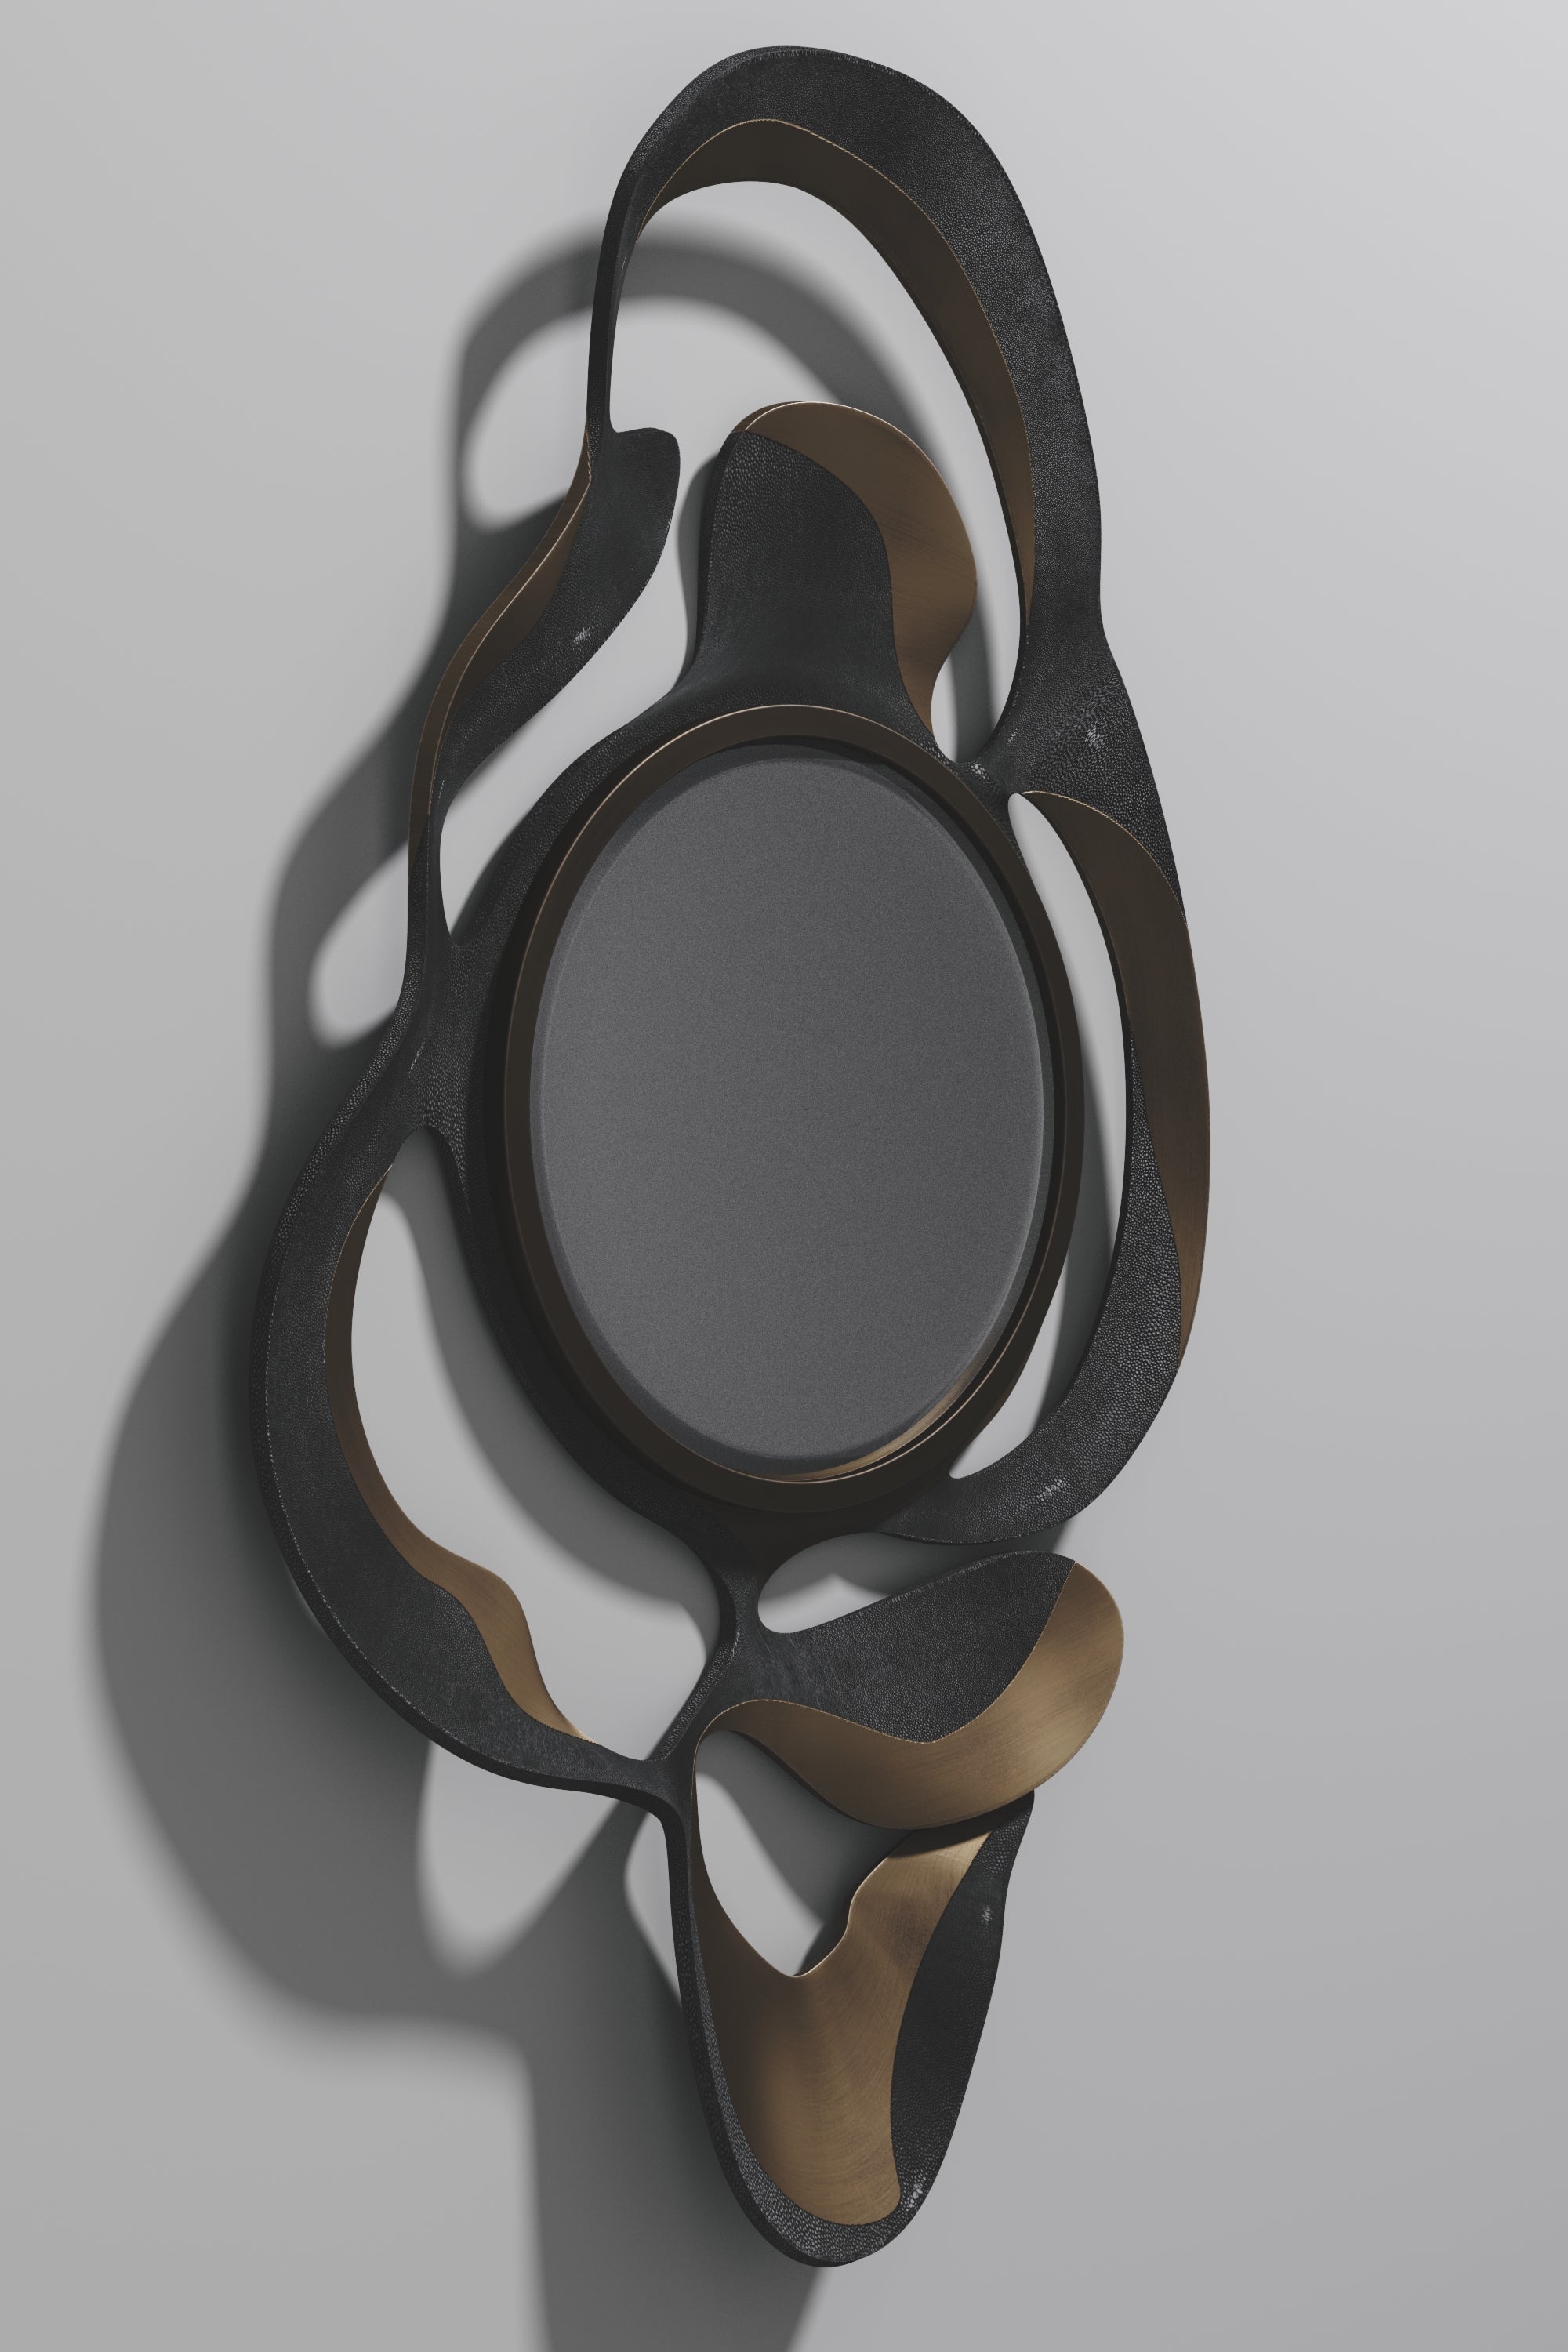 Inlay Shell Inlaid Mirror with Bronze Patina Brass Details by Kifu Paris For Sale